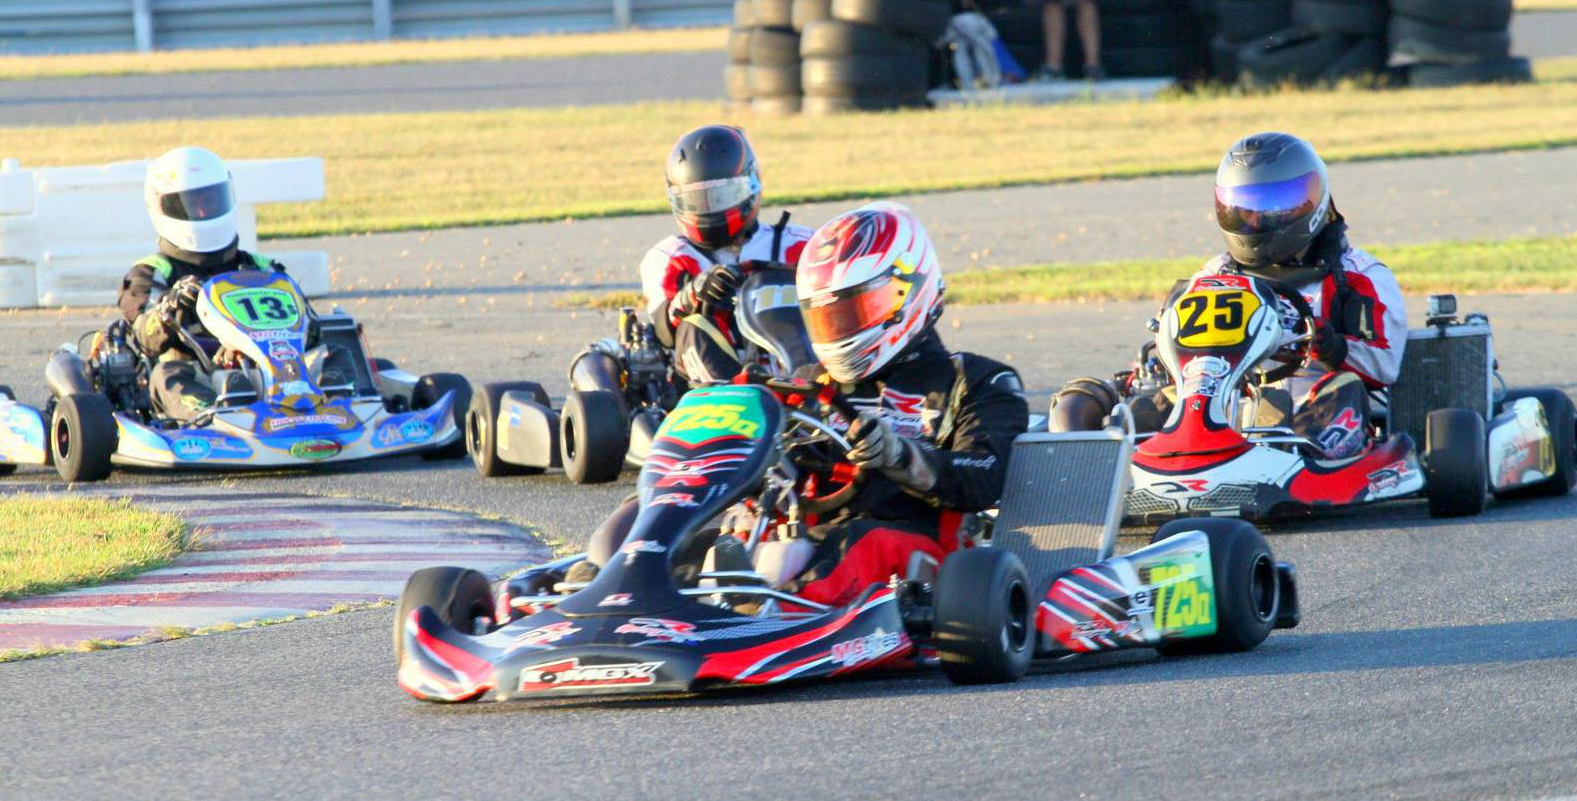 Gilbault at NYRC with a shifter kart